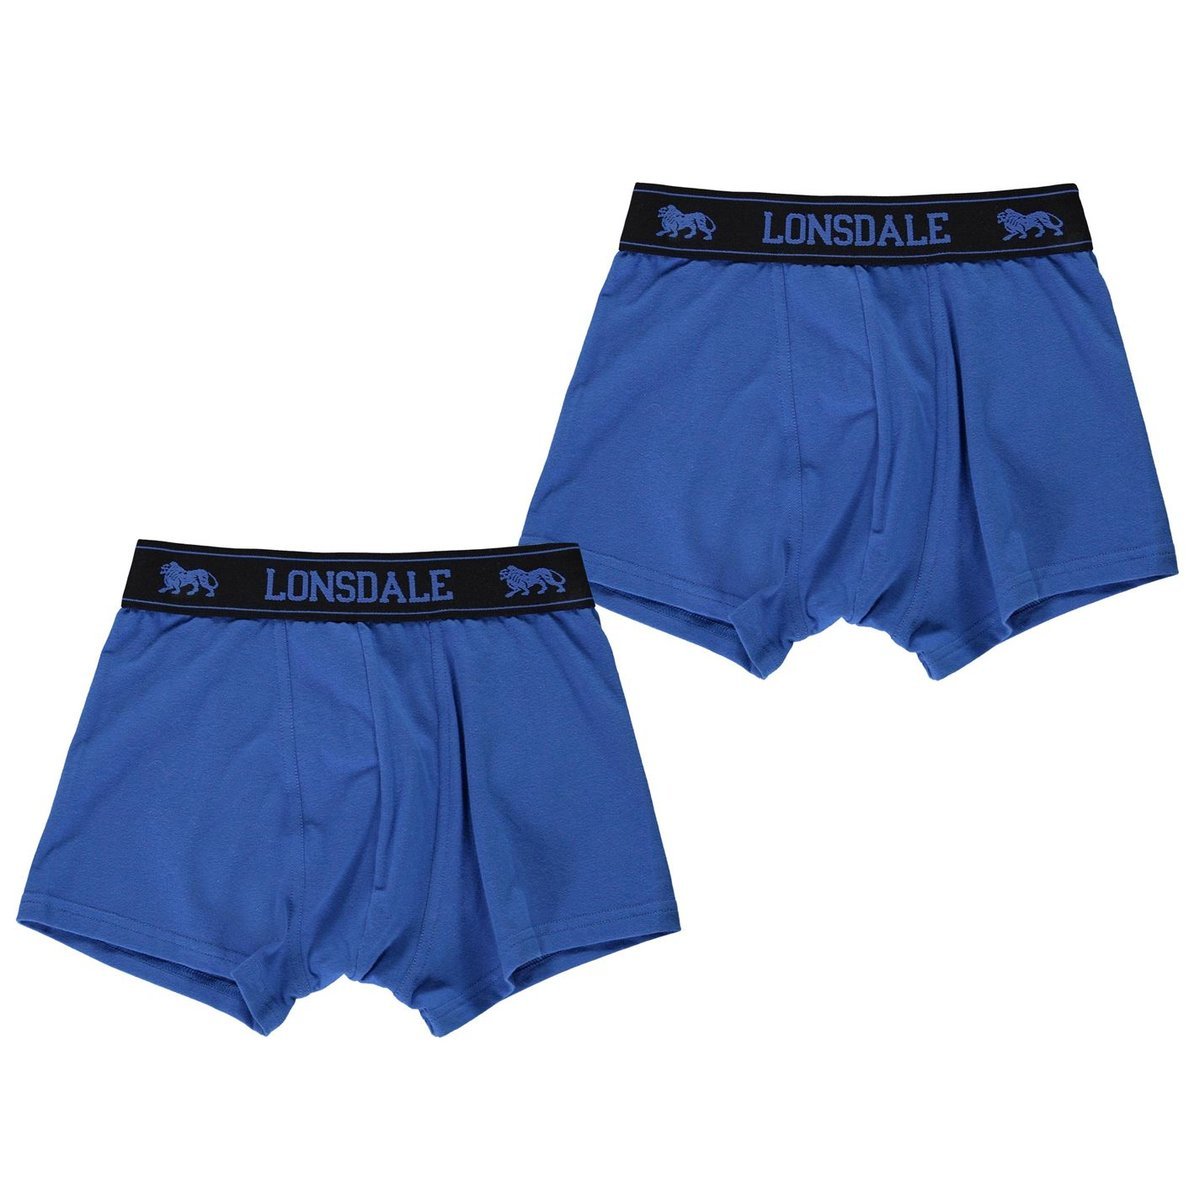 All Lonsdale items page 2